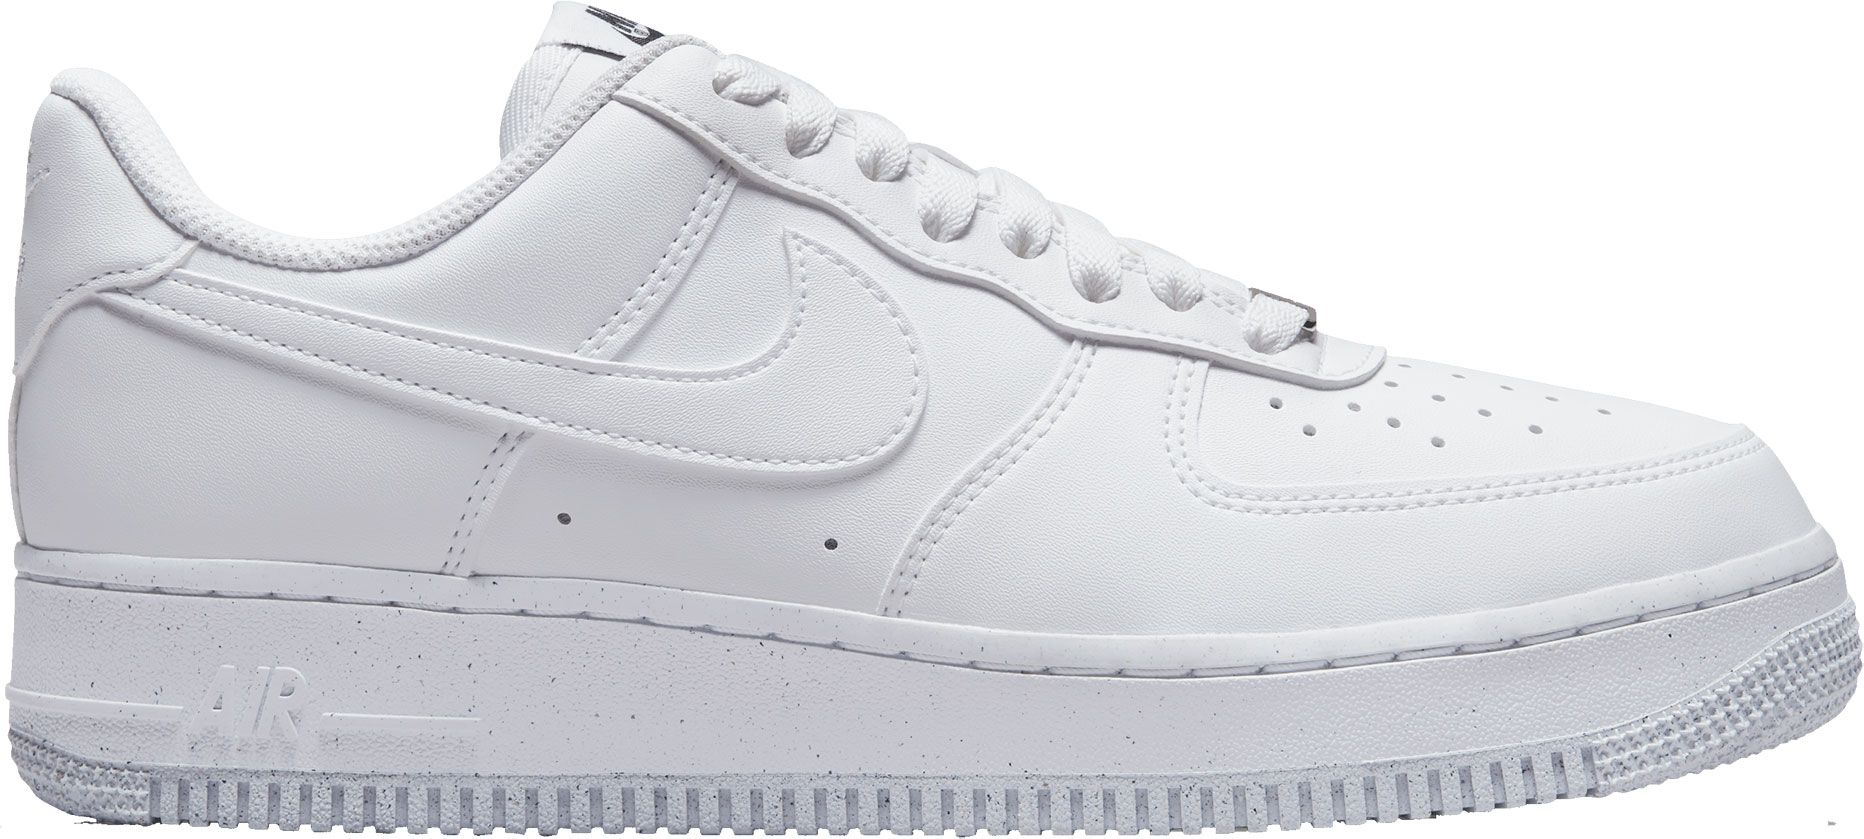 places that sell air force 1 near me